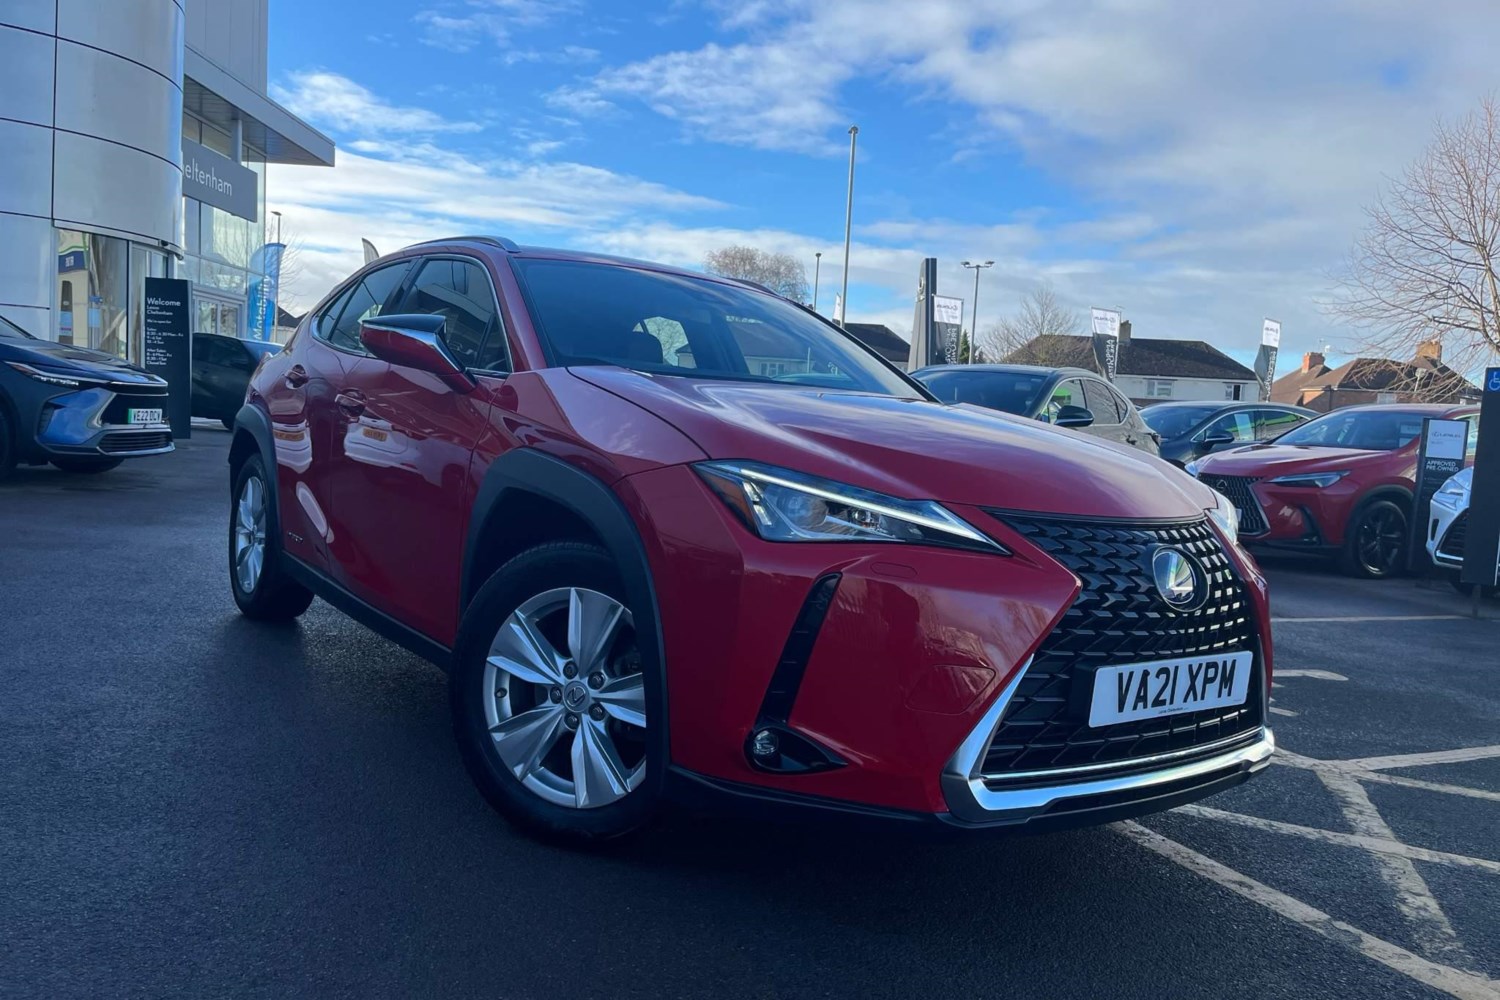 2021 used Lexus UX 250h 2.0 5dr CVT (without Nav)